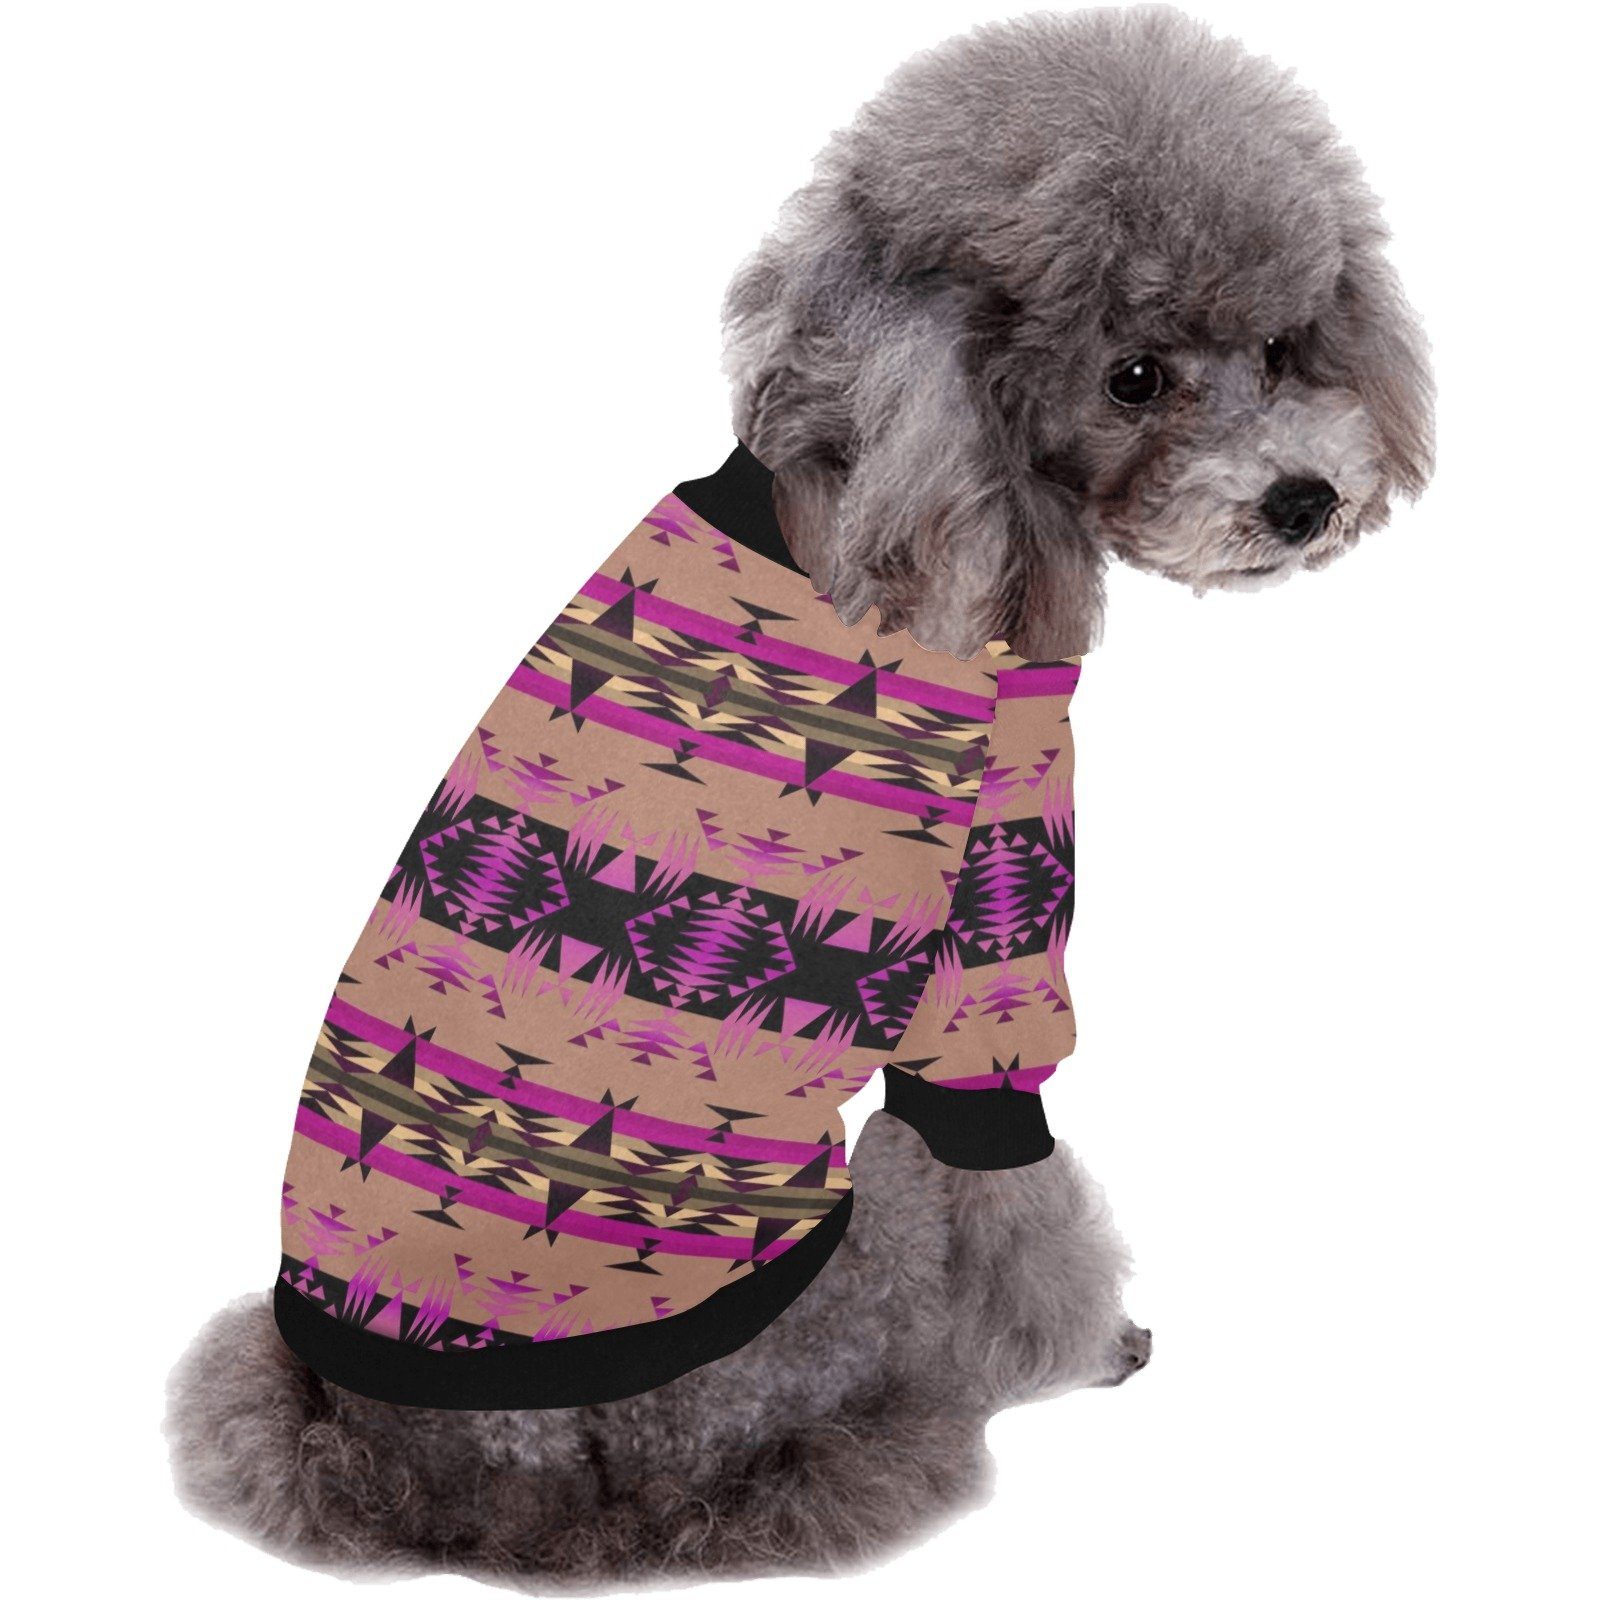 Between the Mountains Berry Pet Dog Round Neck Shirt Pet Dog Round Neck Shirt e-joyer 